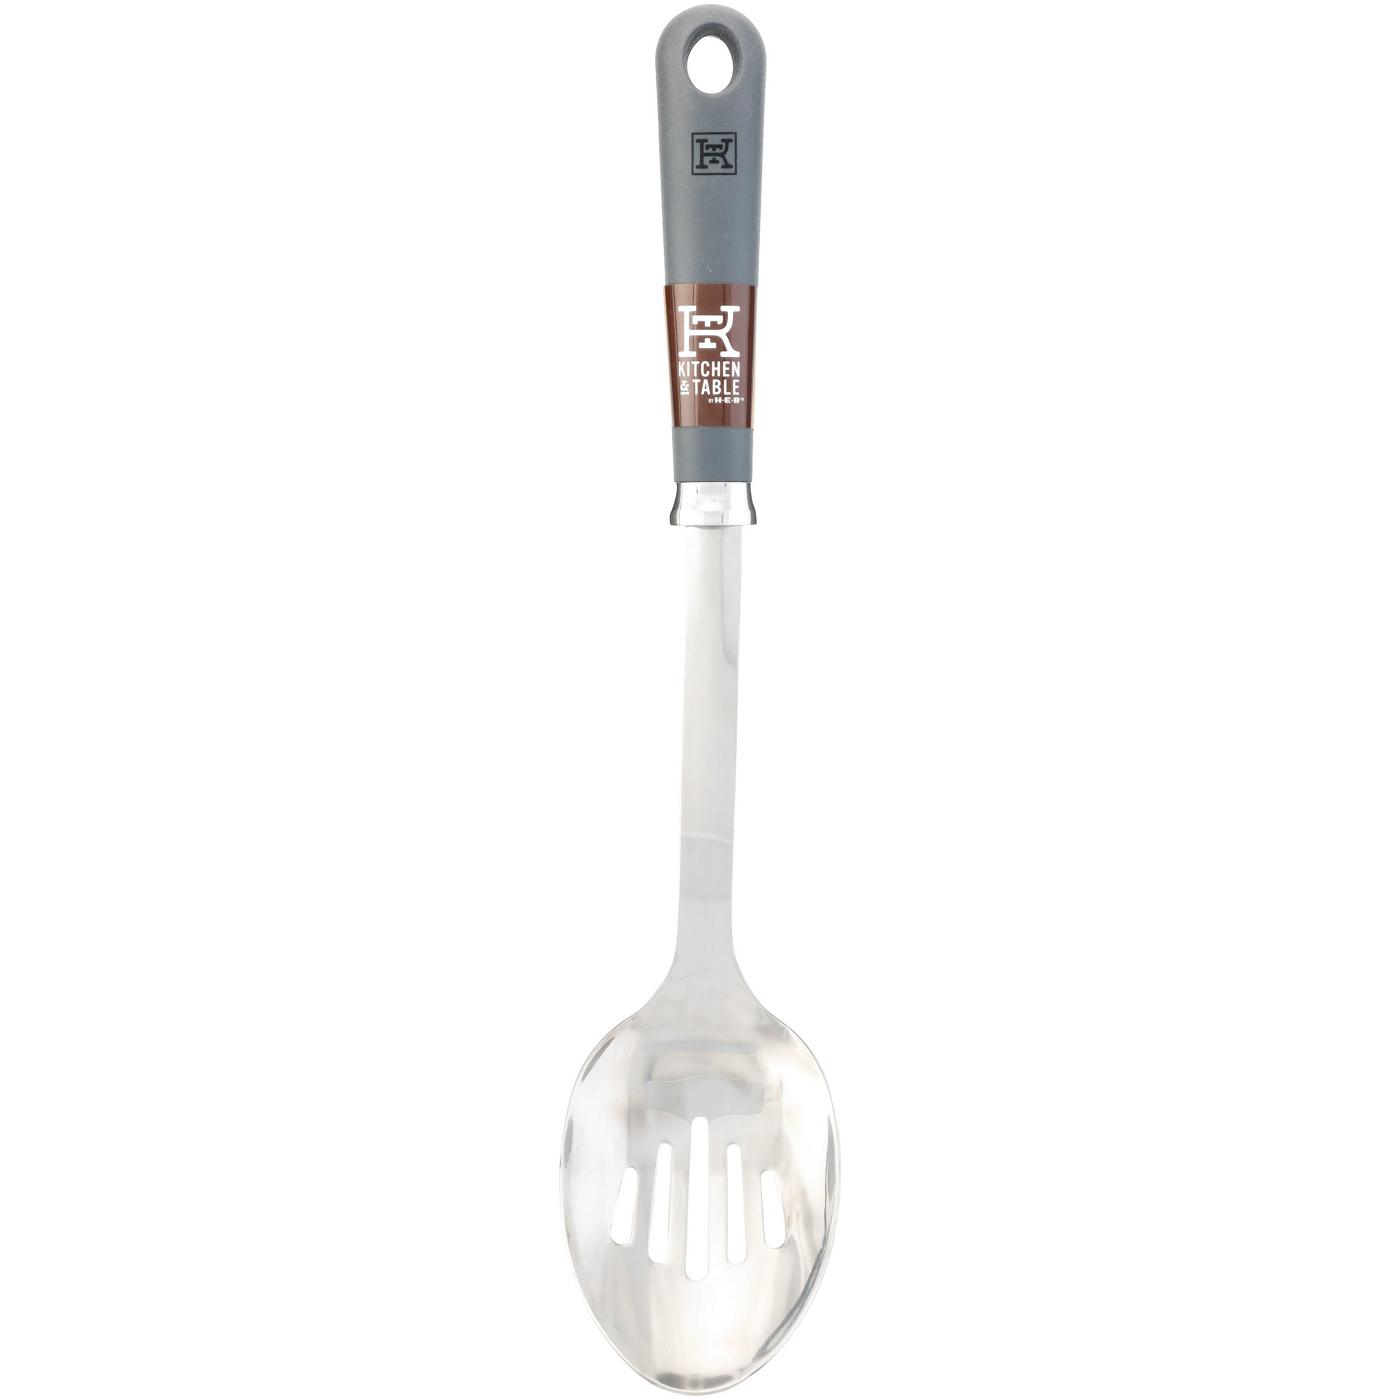 Kitchen & Table by H-E-B Stainless Steel Slotted Spoon; image 1 of 2